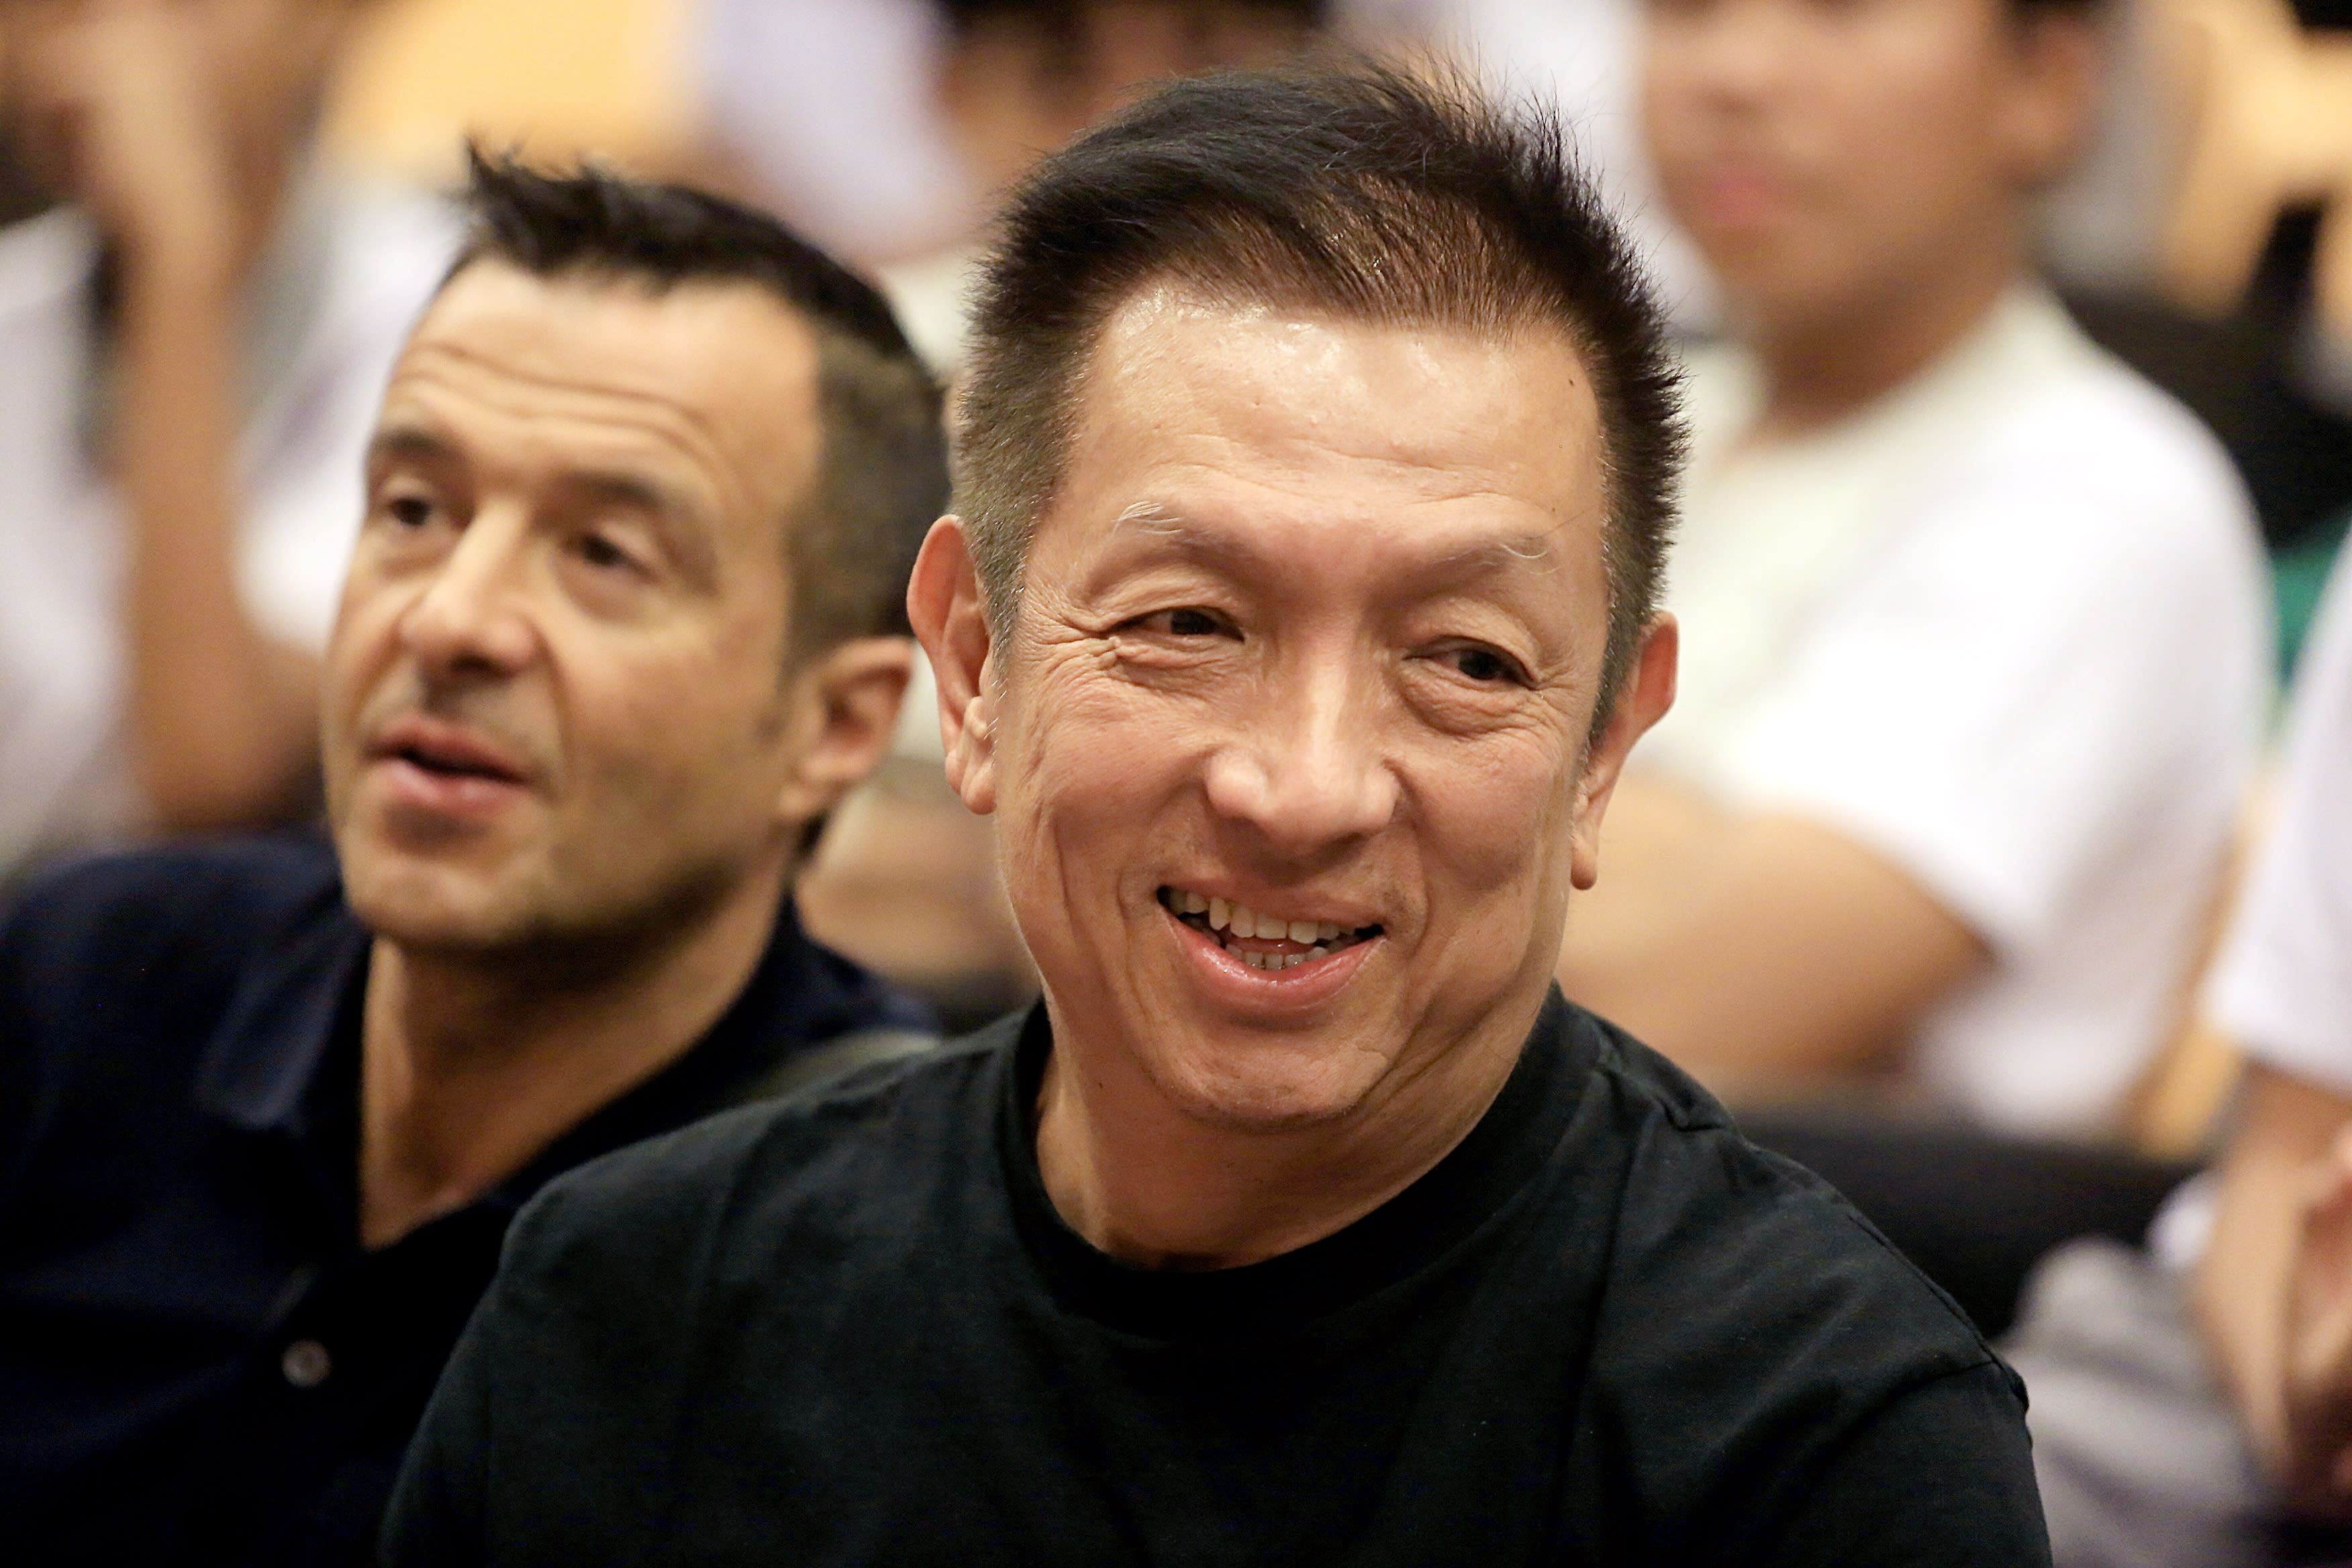 Mr Peter Lim (pictured in front), 69, has filed two police reports on June 20 and Aug 2, 2022 about people impersonating him online.